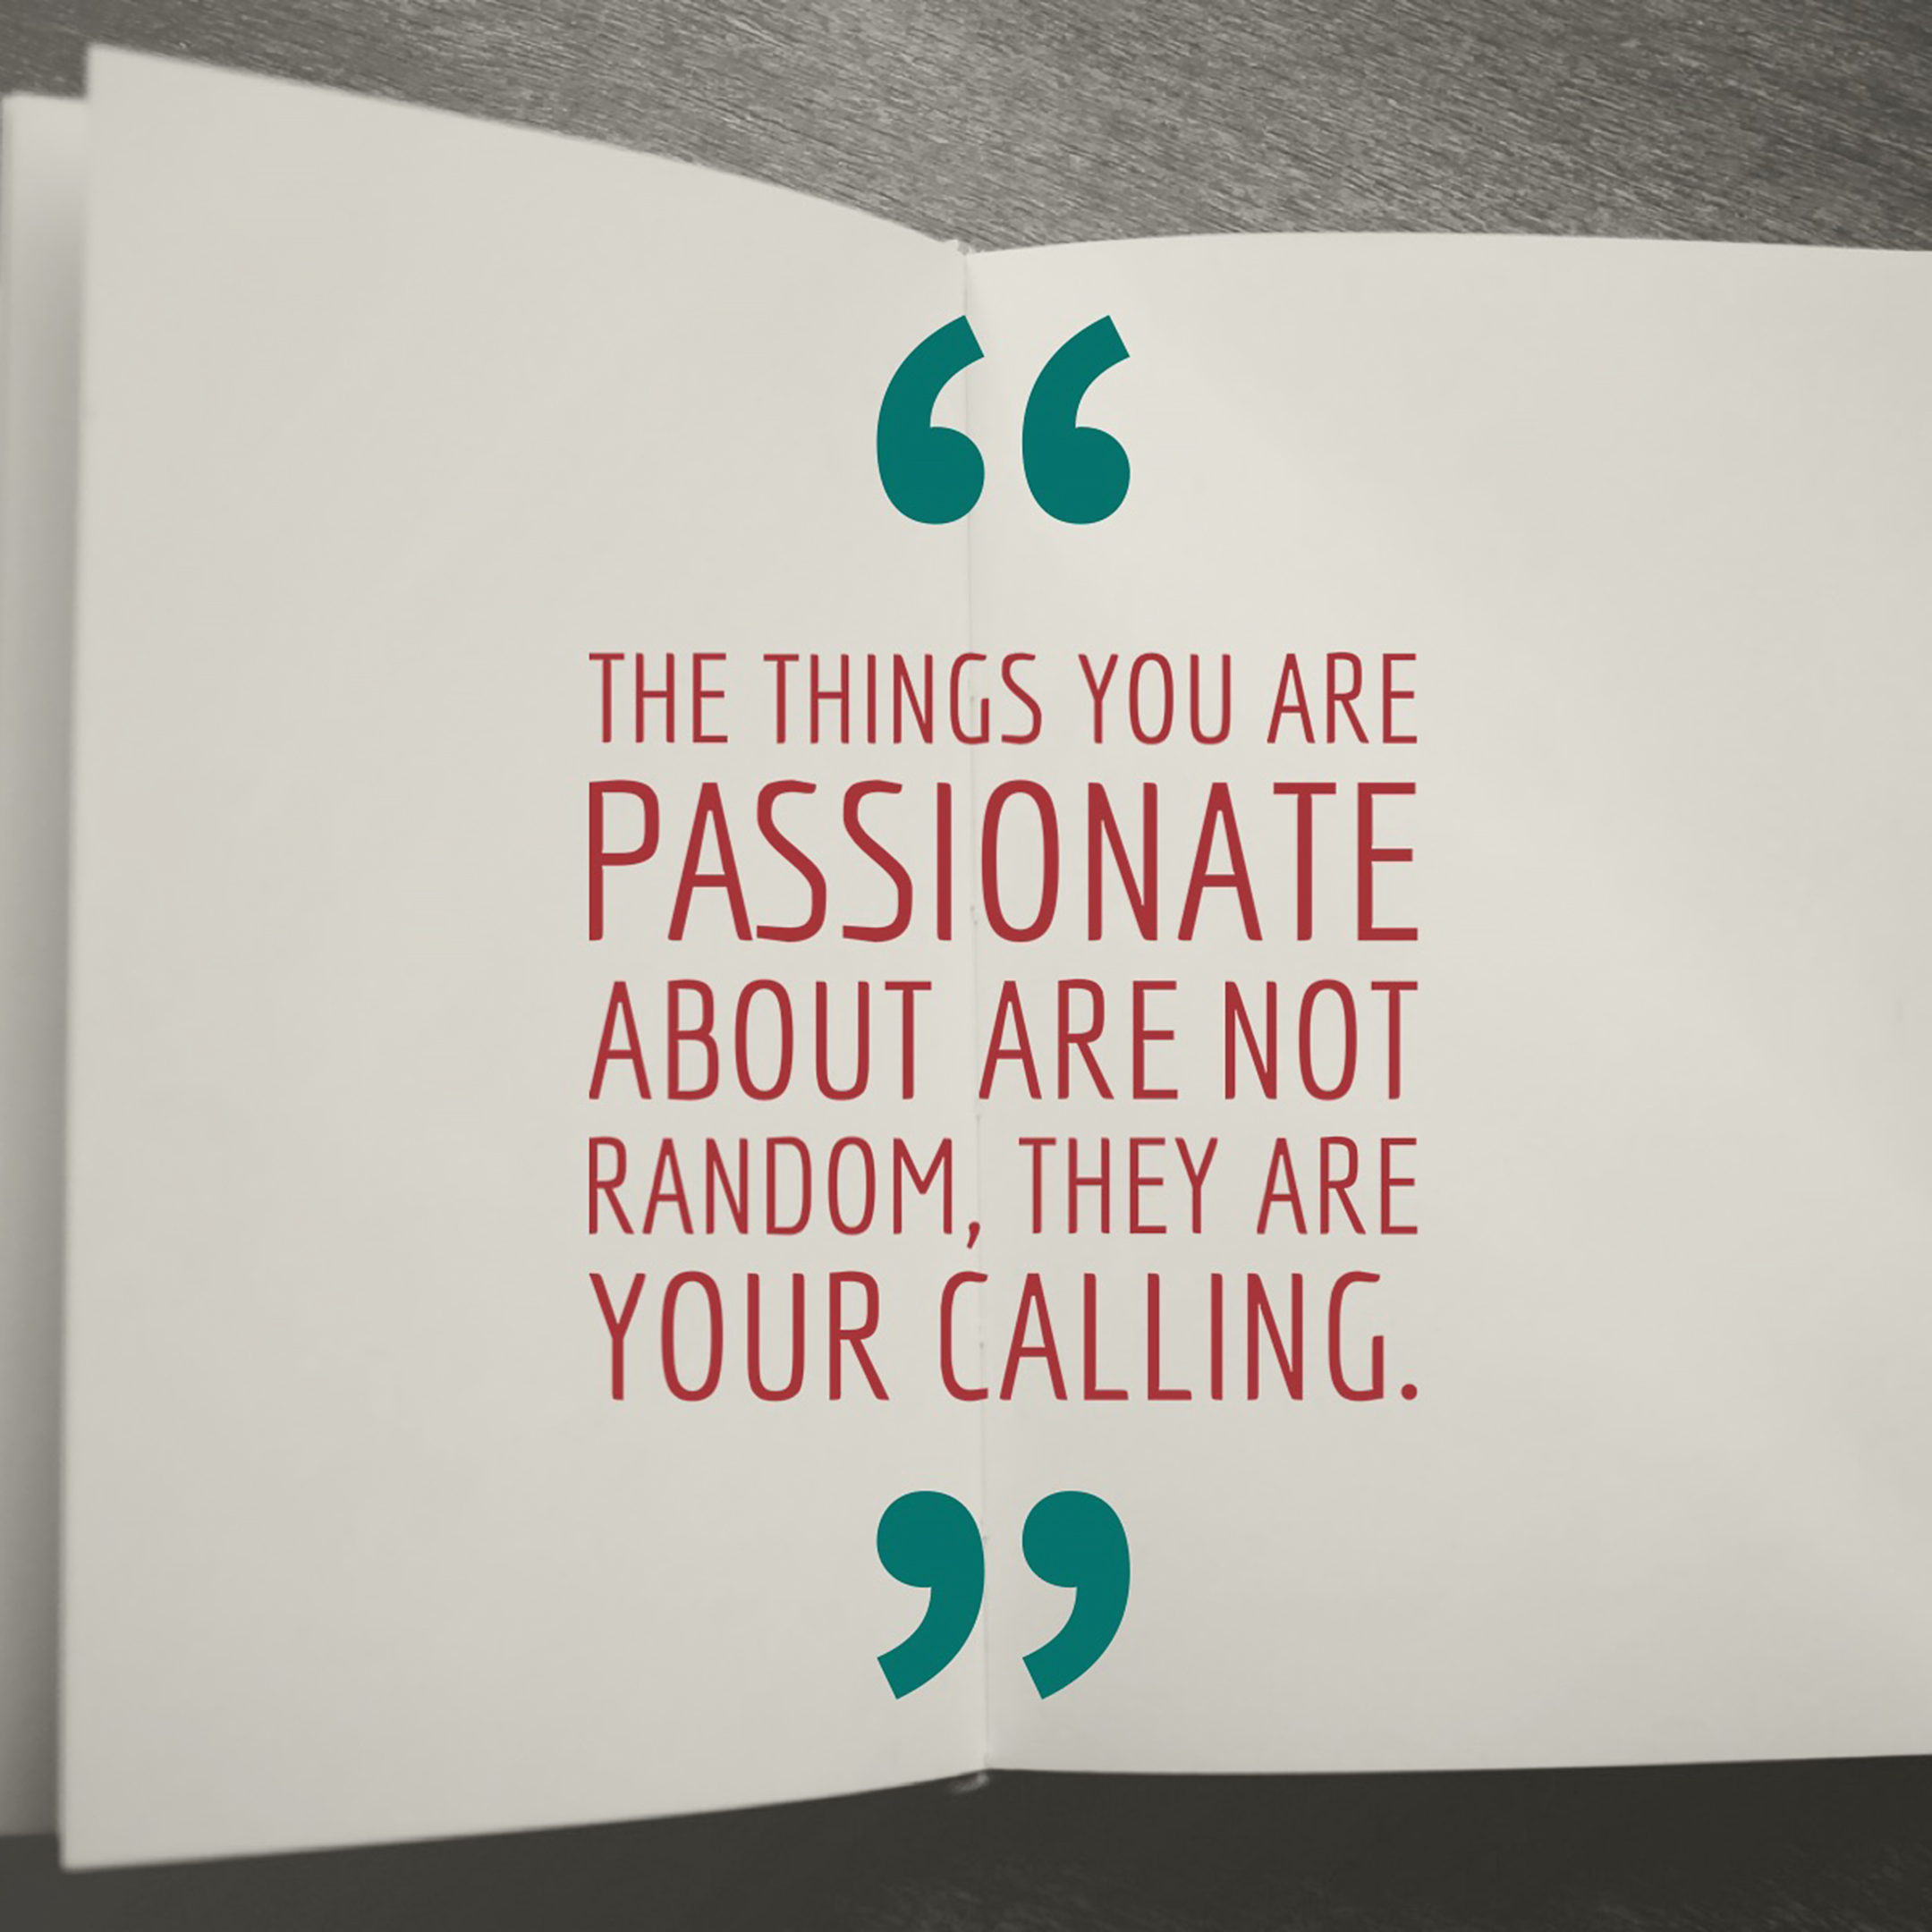 Passion is one of the positive traits that true leaders posesses.